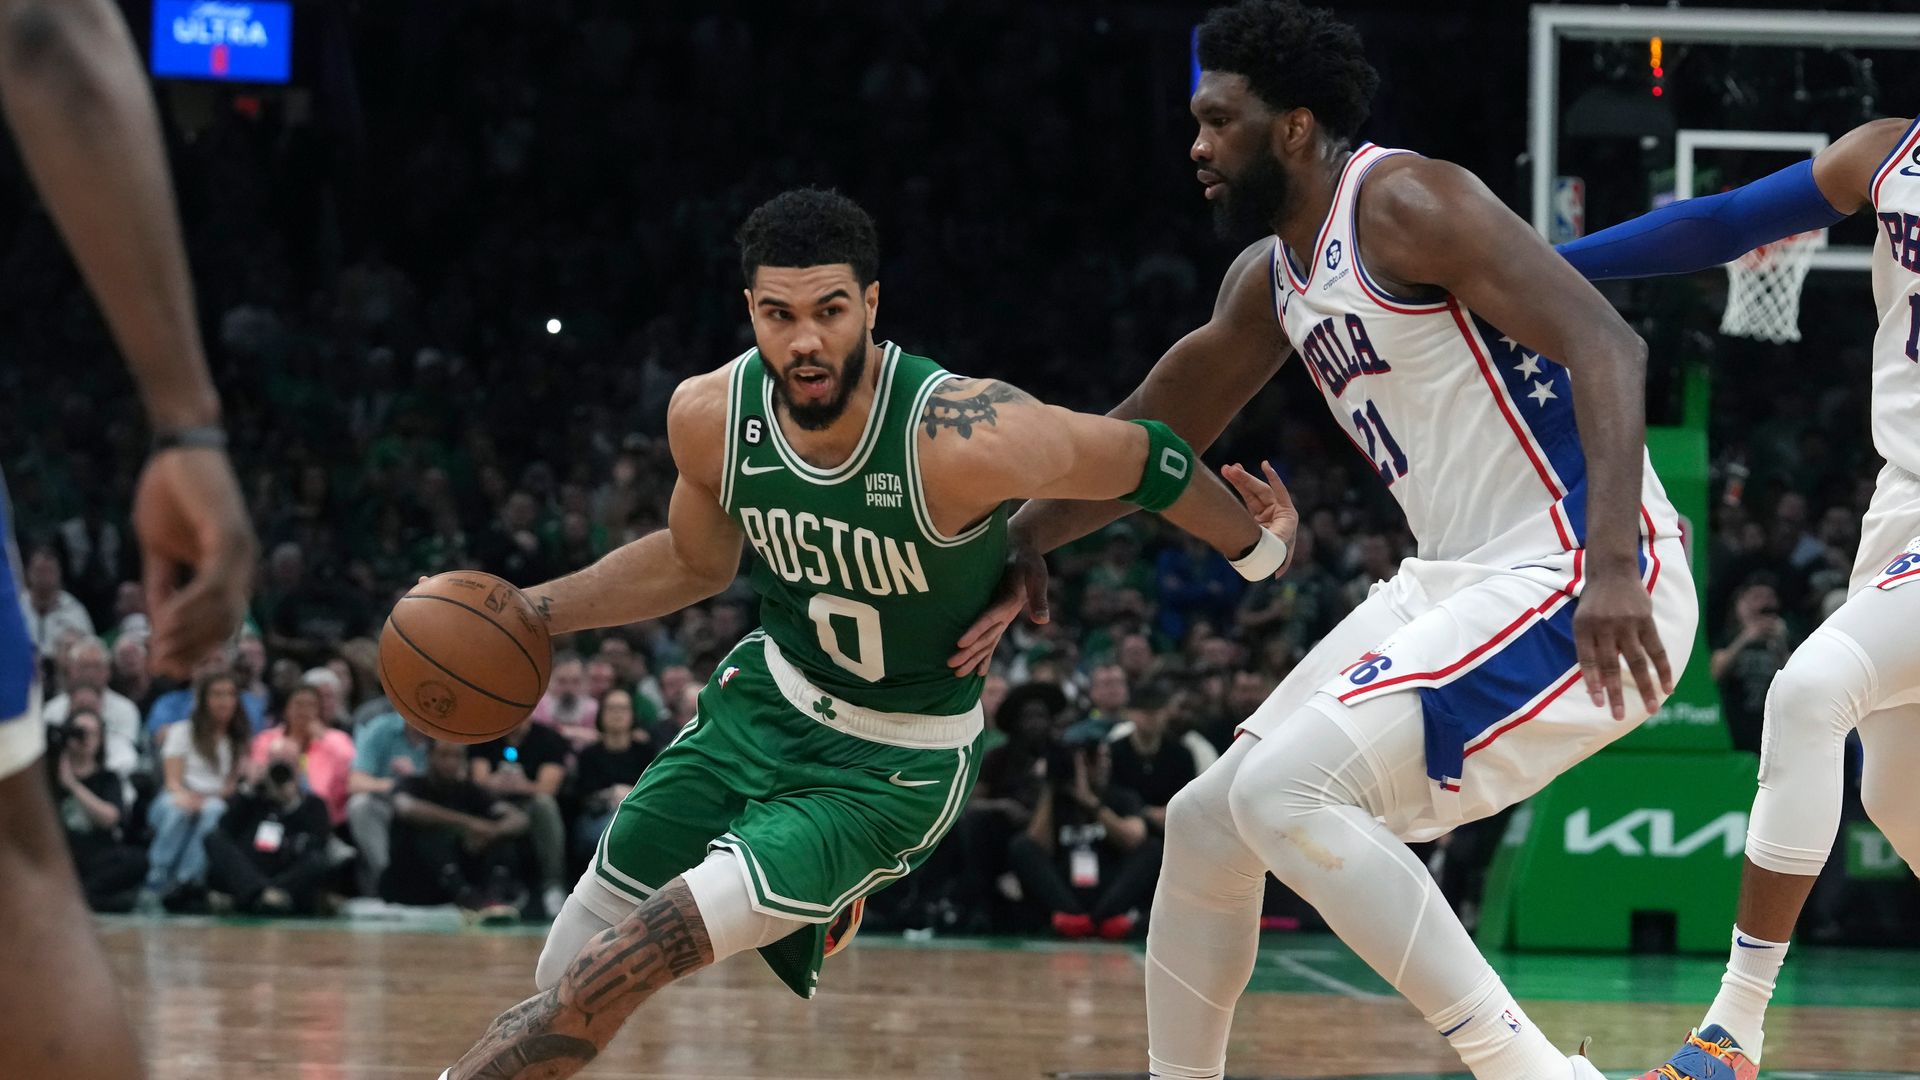 Highlights: 76ers 88-112 Celtics | Philly blown out in Boston